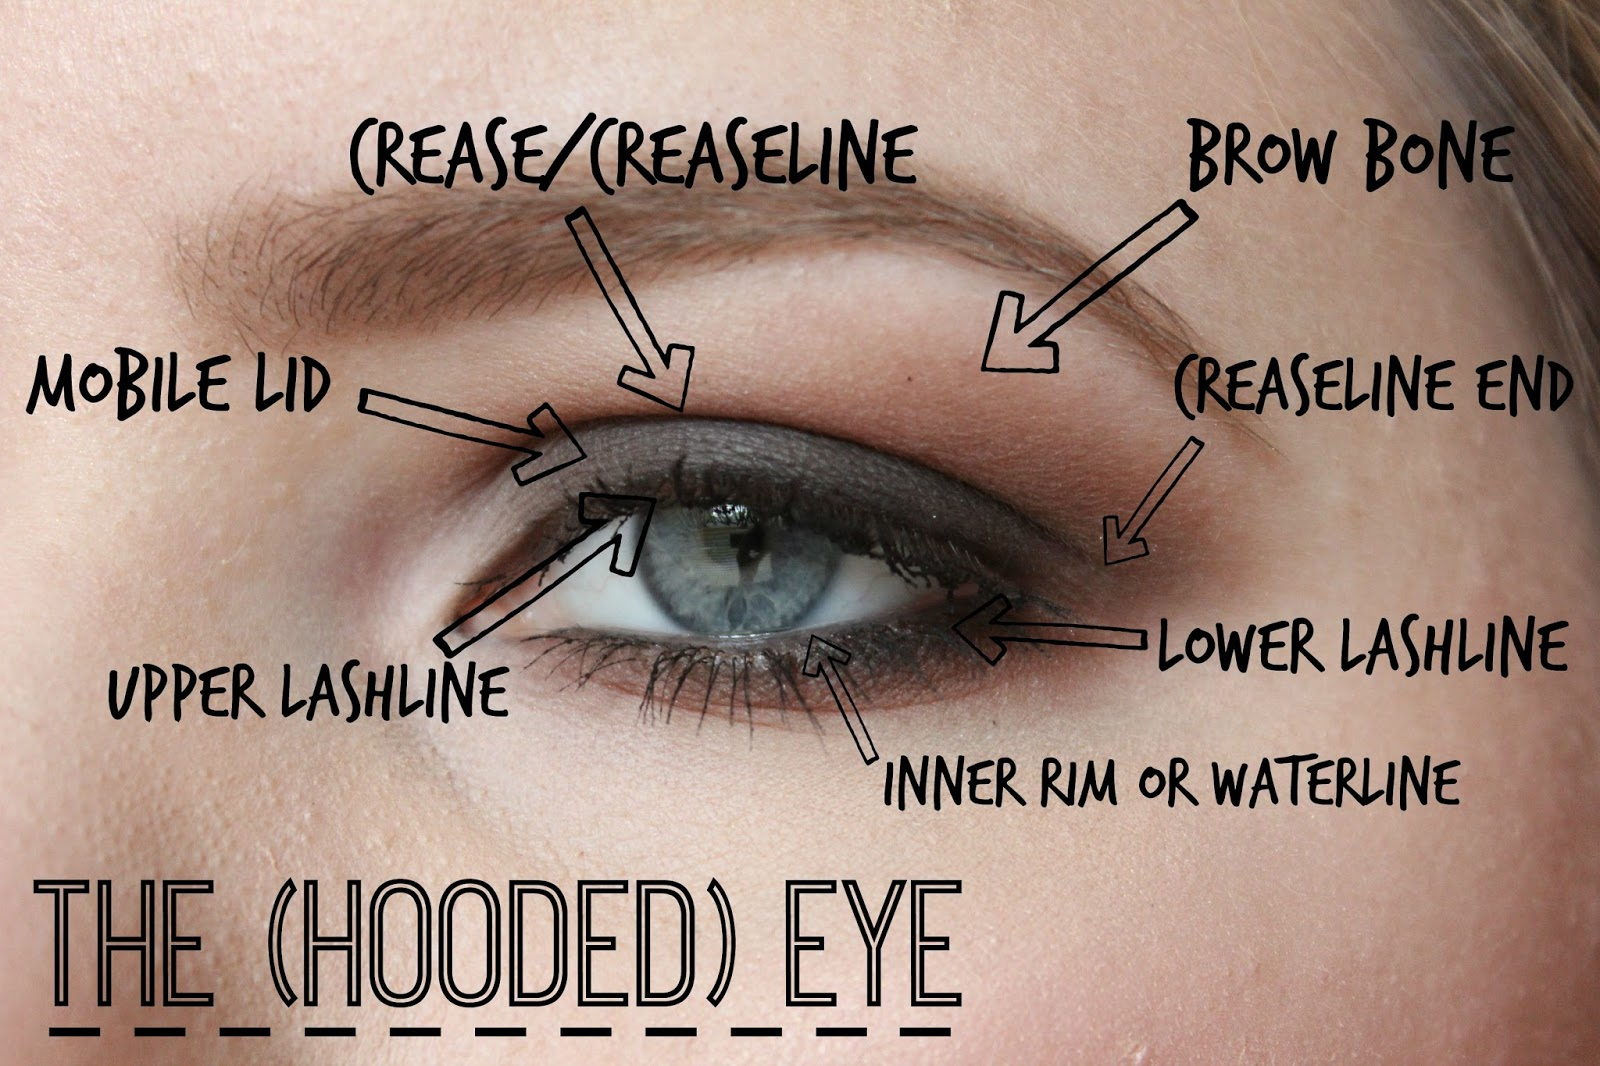 Makeup Hooded Eyes 15 Magical Makeup Tips To Beautify Your Hooded Eyes In A Minute